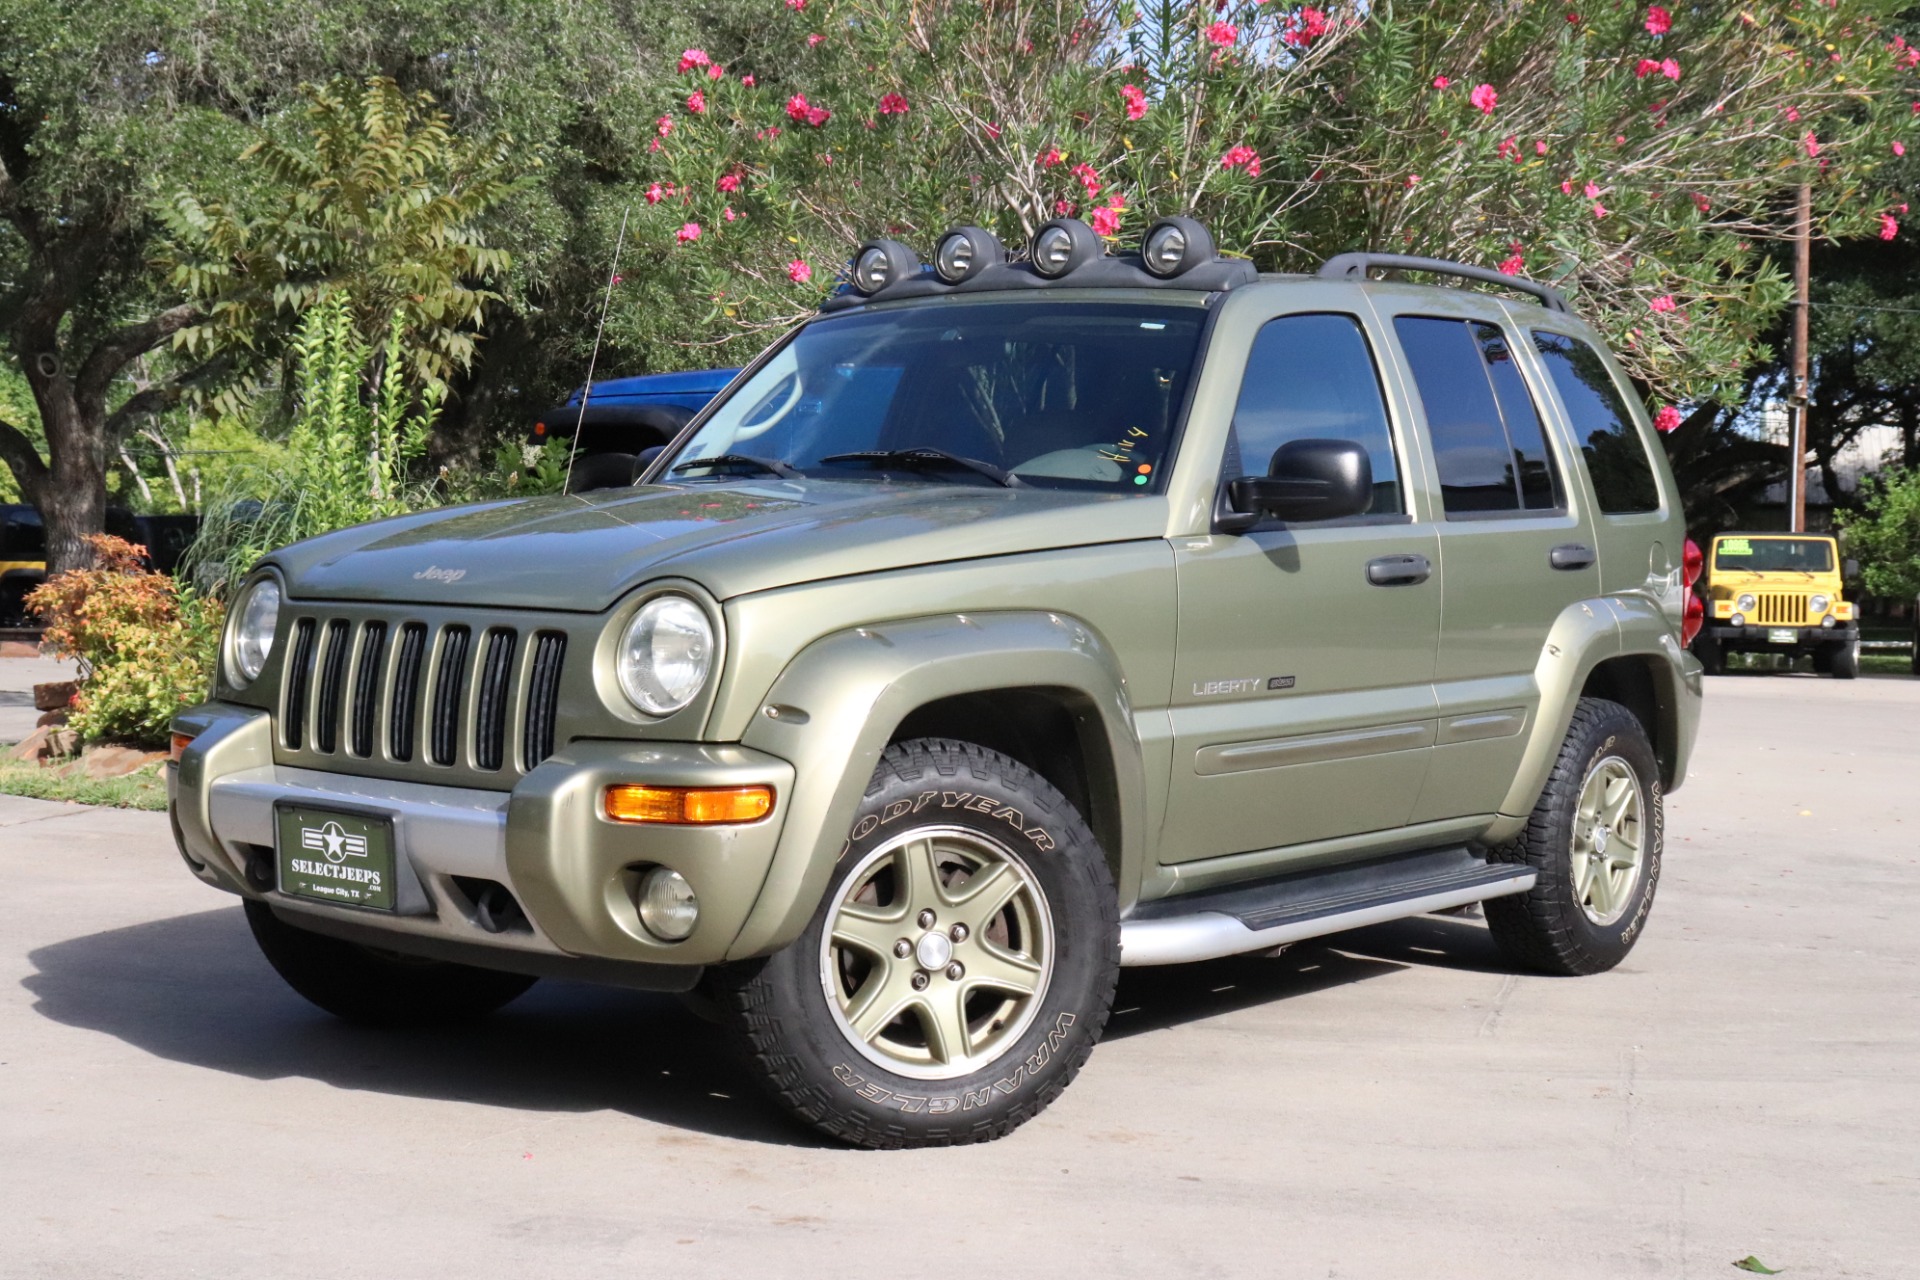 Jeep Liberty 3.7 2003 Opinie